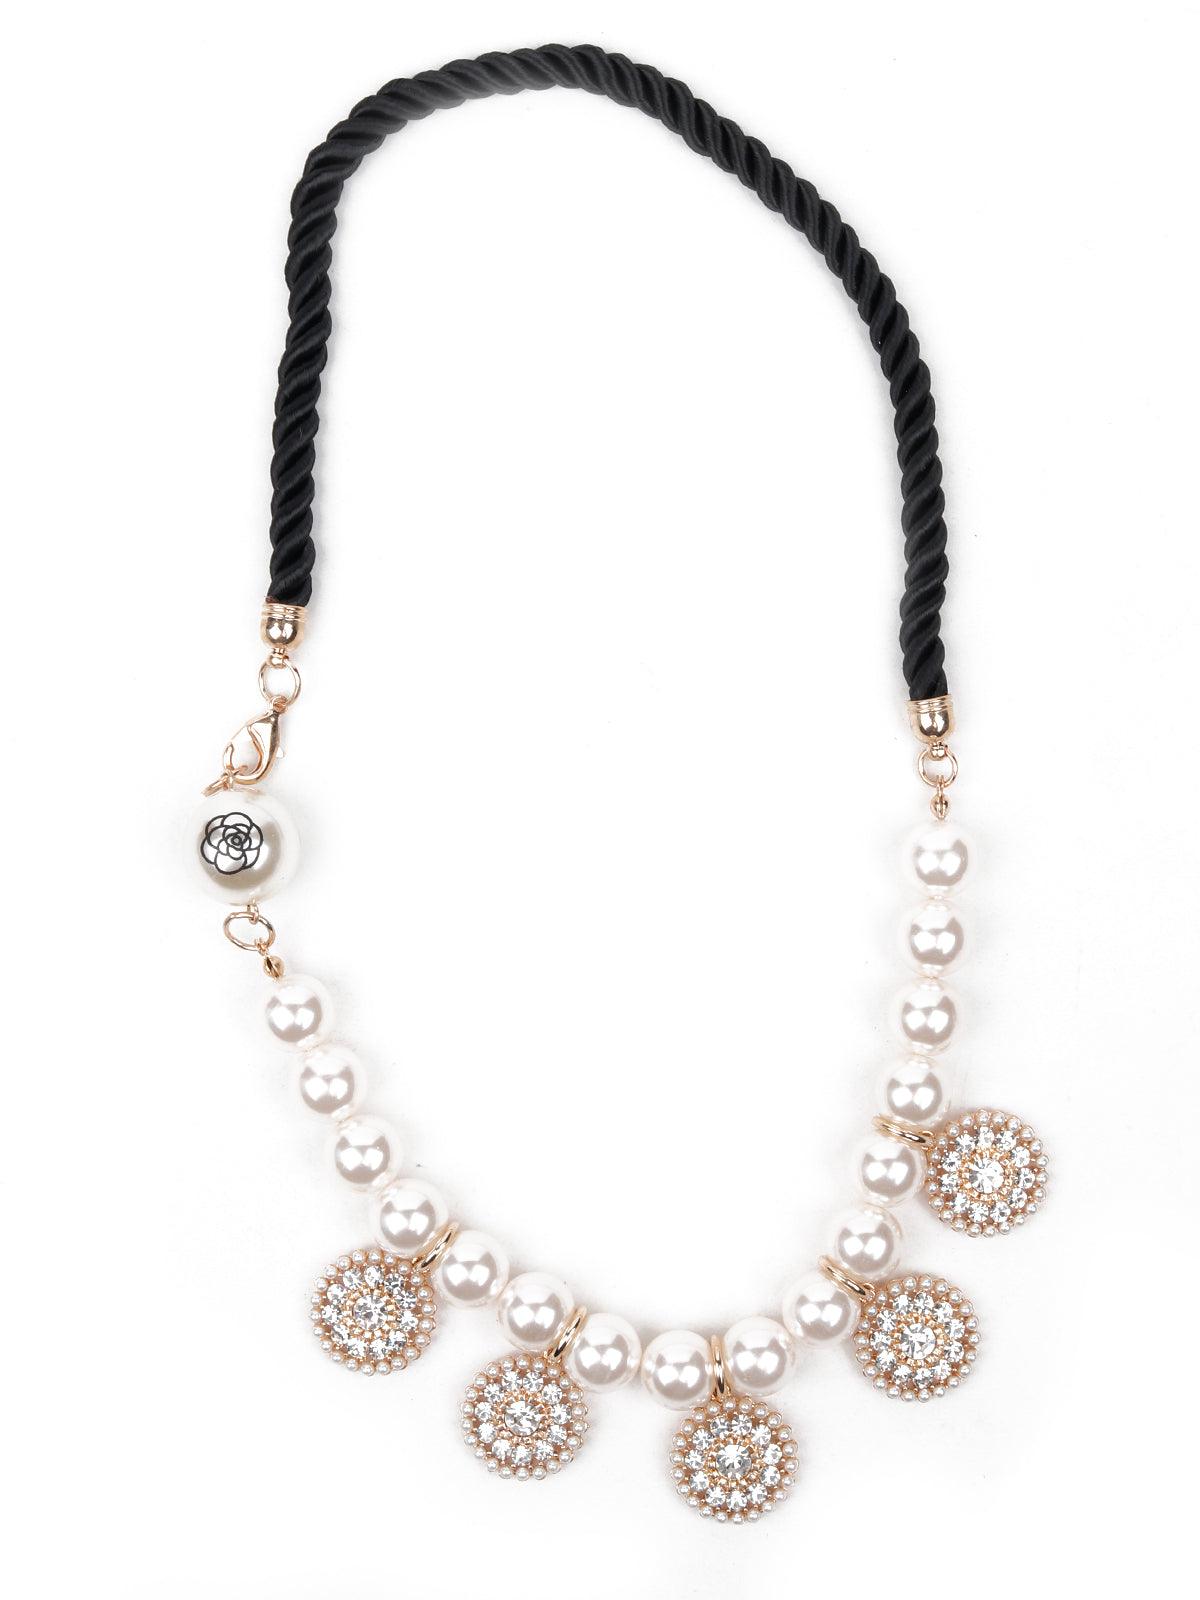 Pearl necklace embellished with charms - Odette